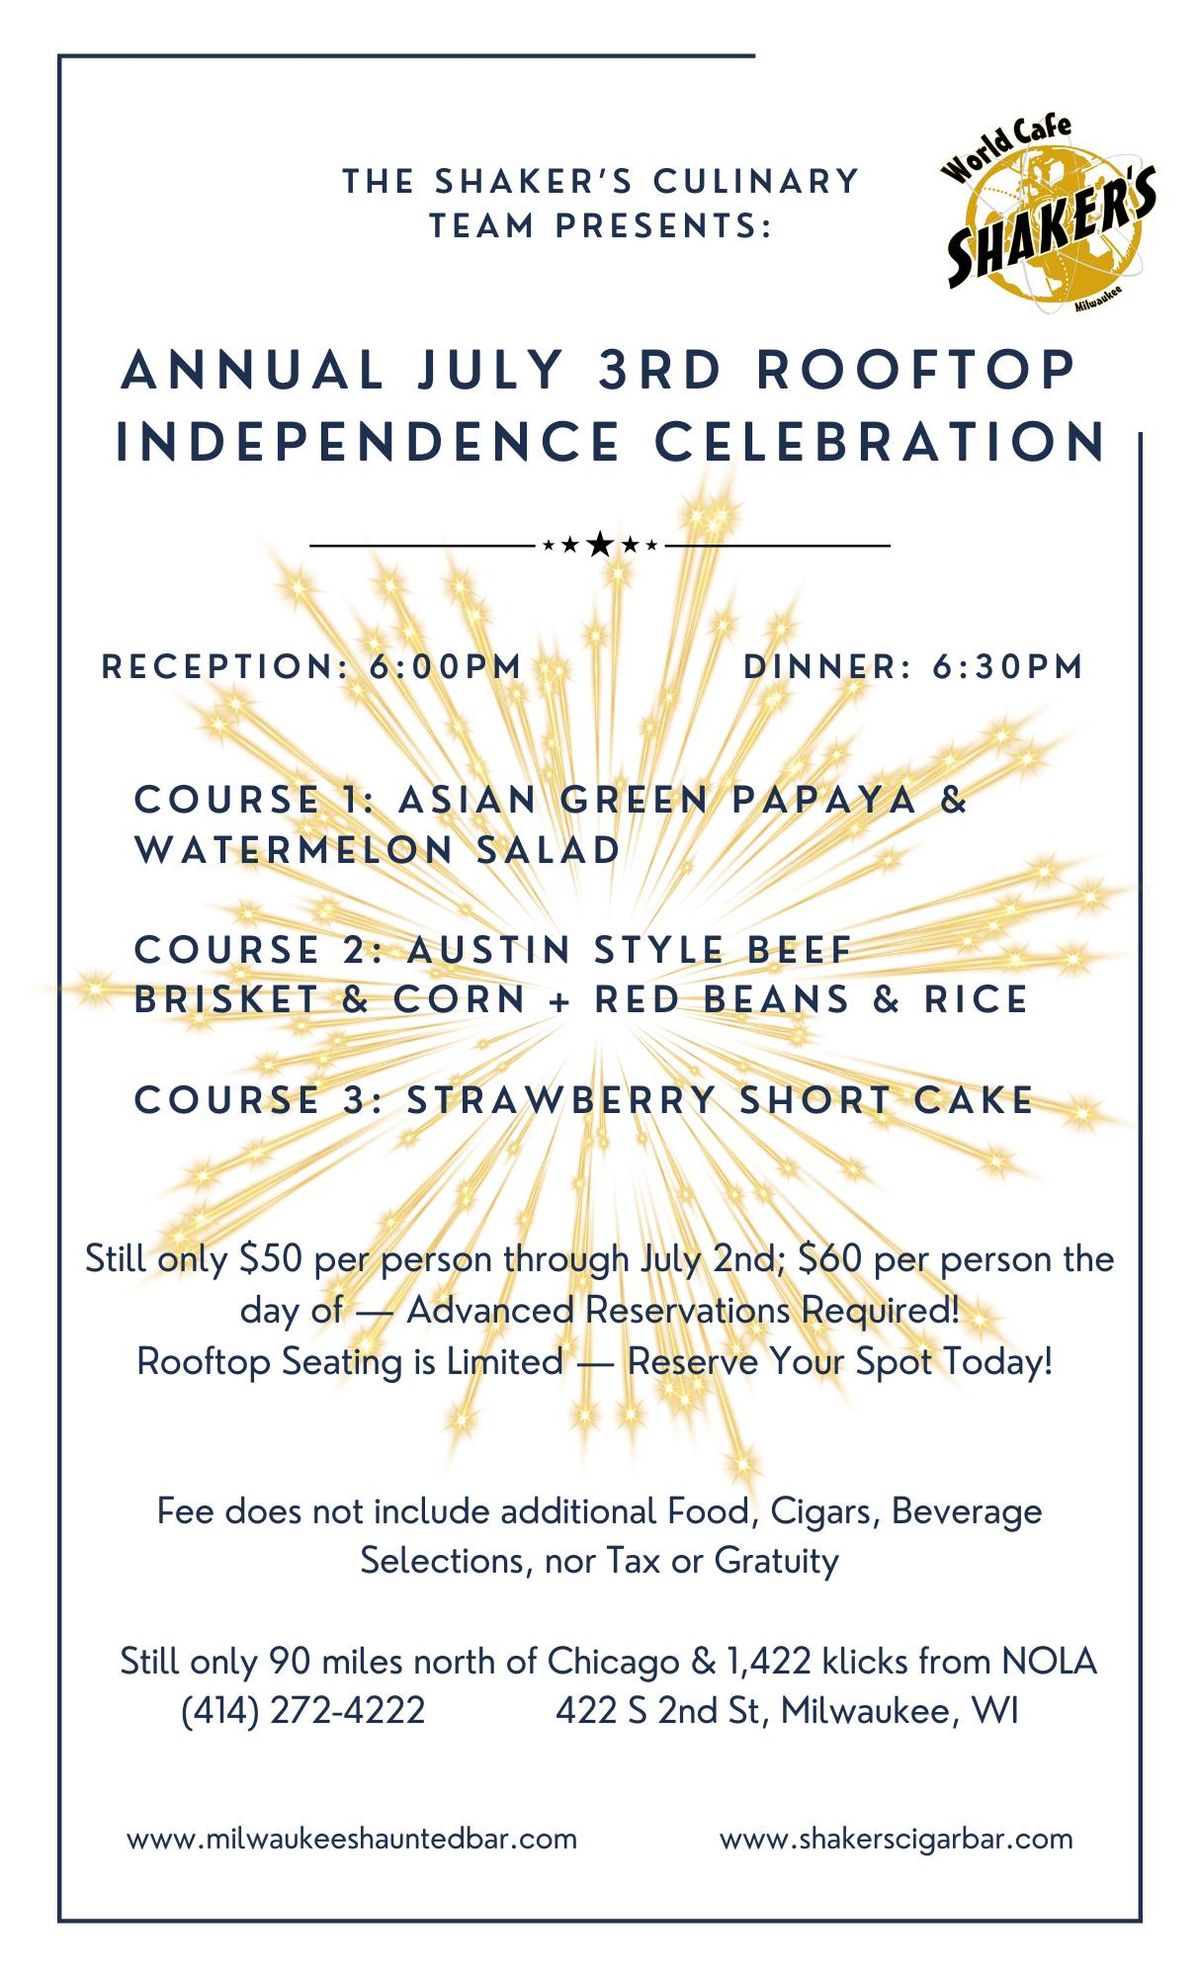 Annual Rooftop Independence Celebration Dinner